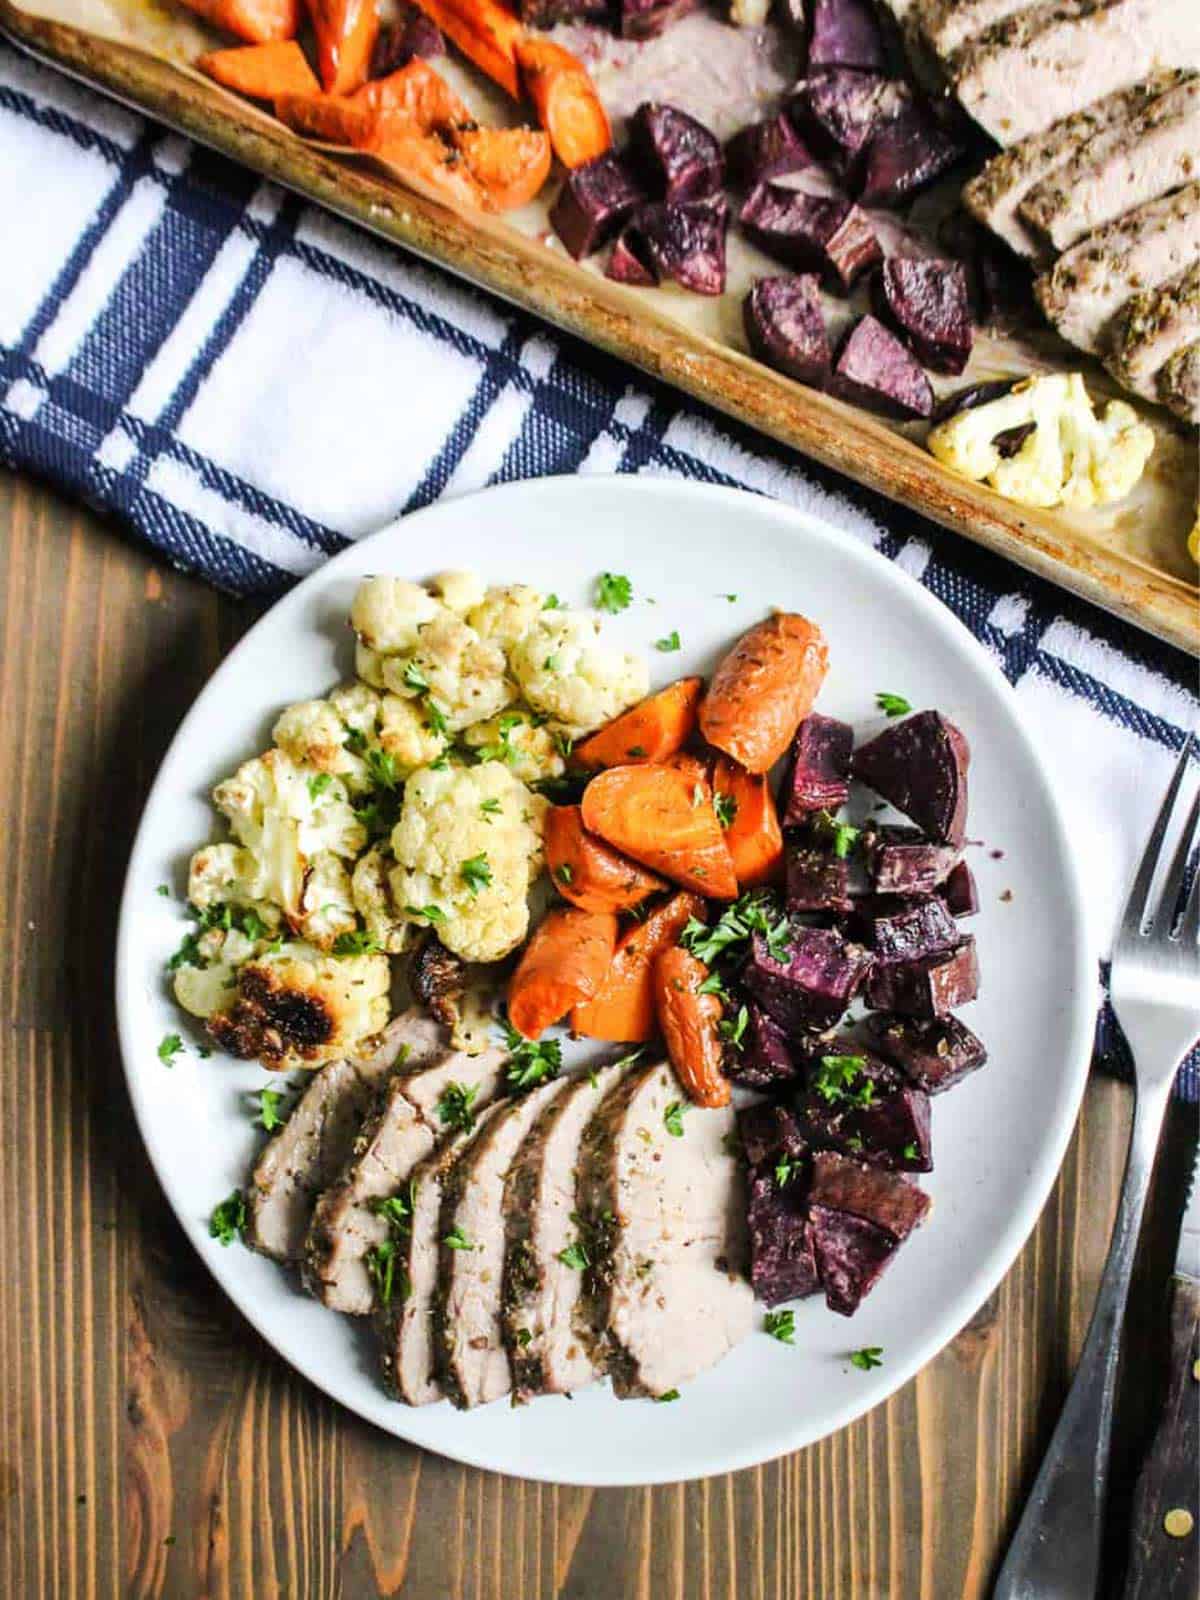 Plate with cooked pork, cauliflower, carrots, and purple sweet potatoes.